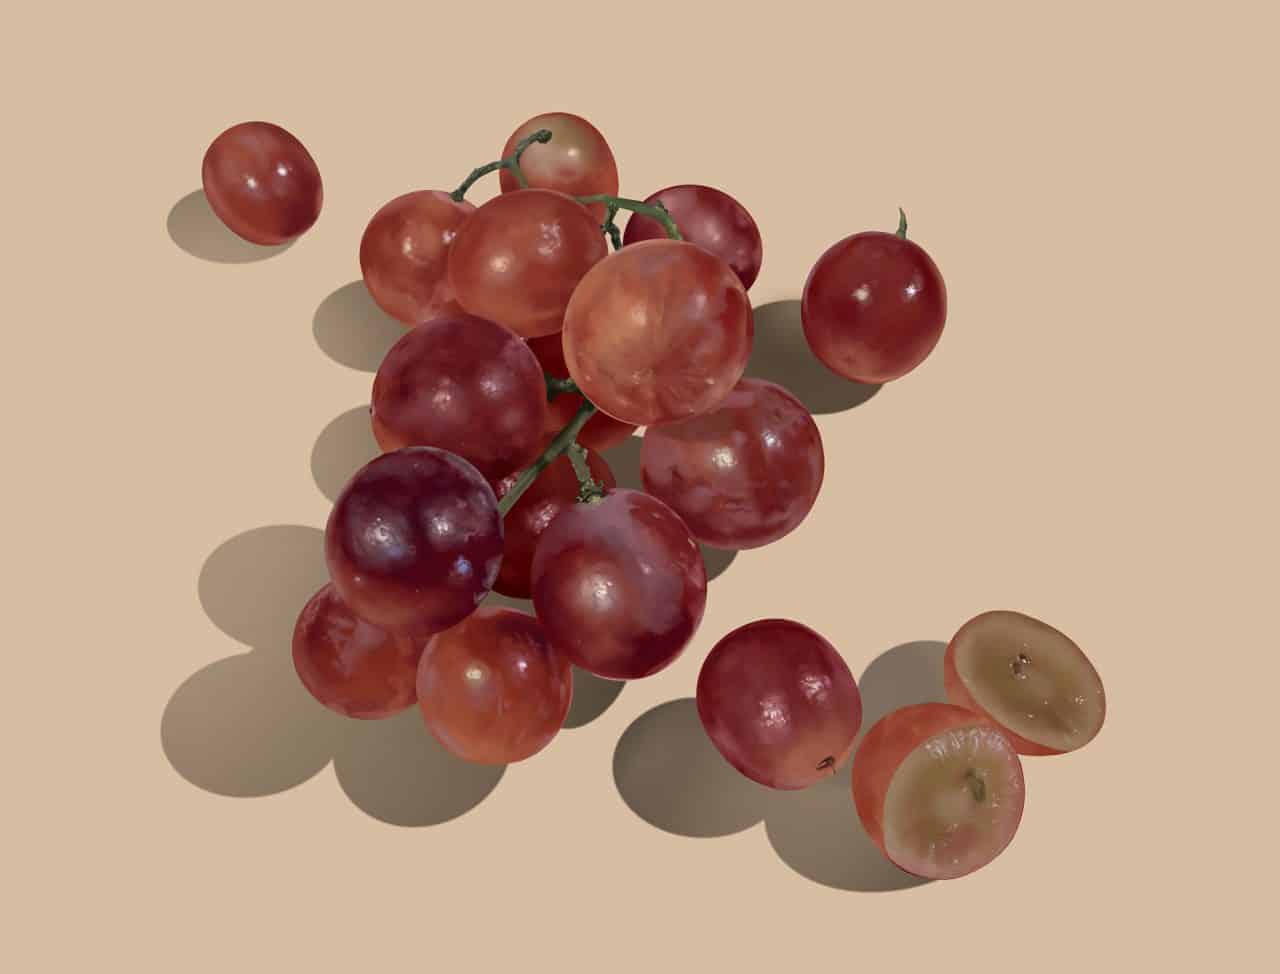 Now you're an expert on how to make the best realistic grape drawing!